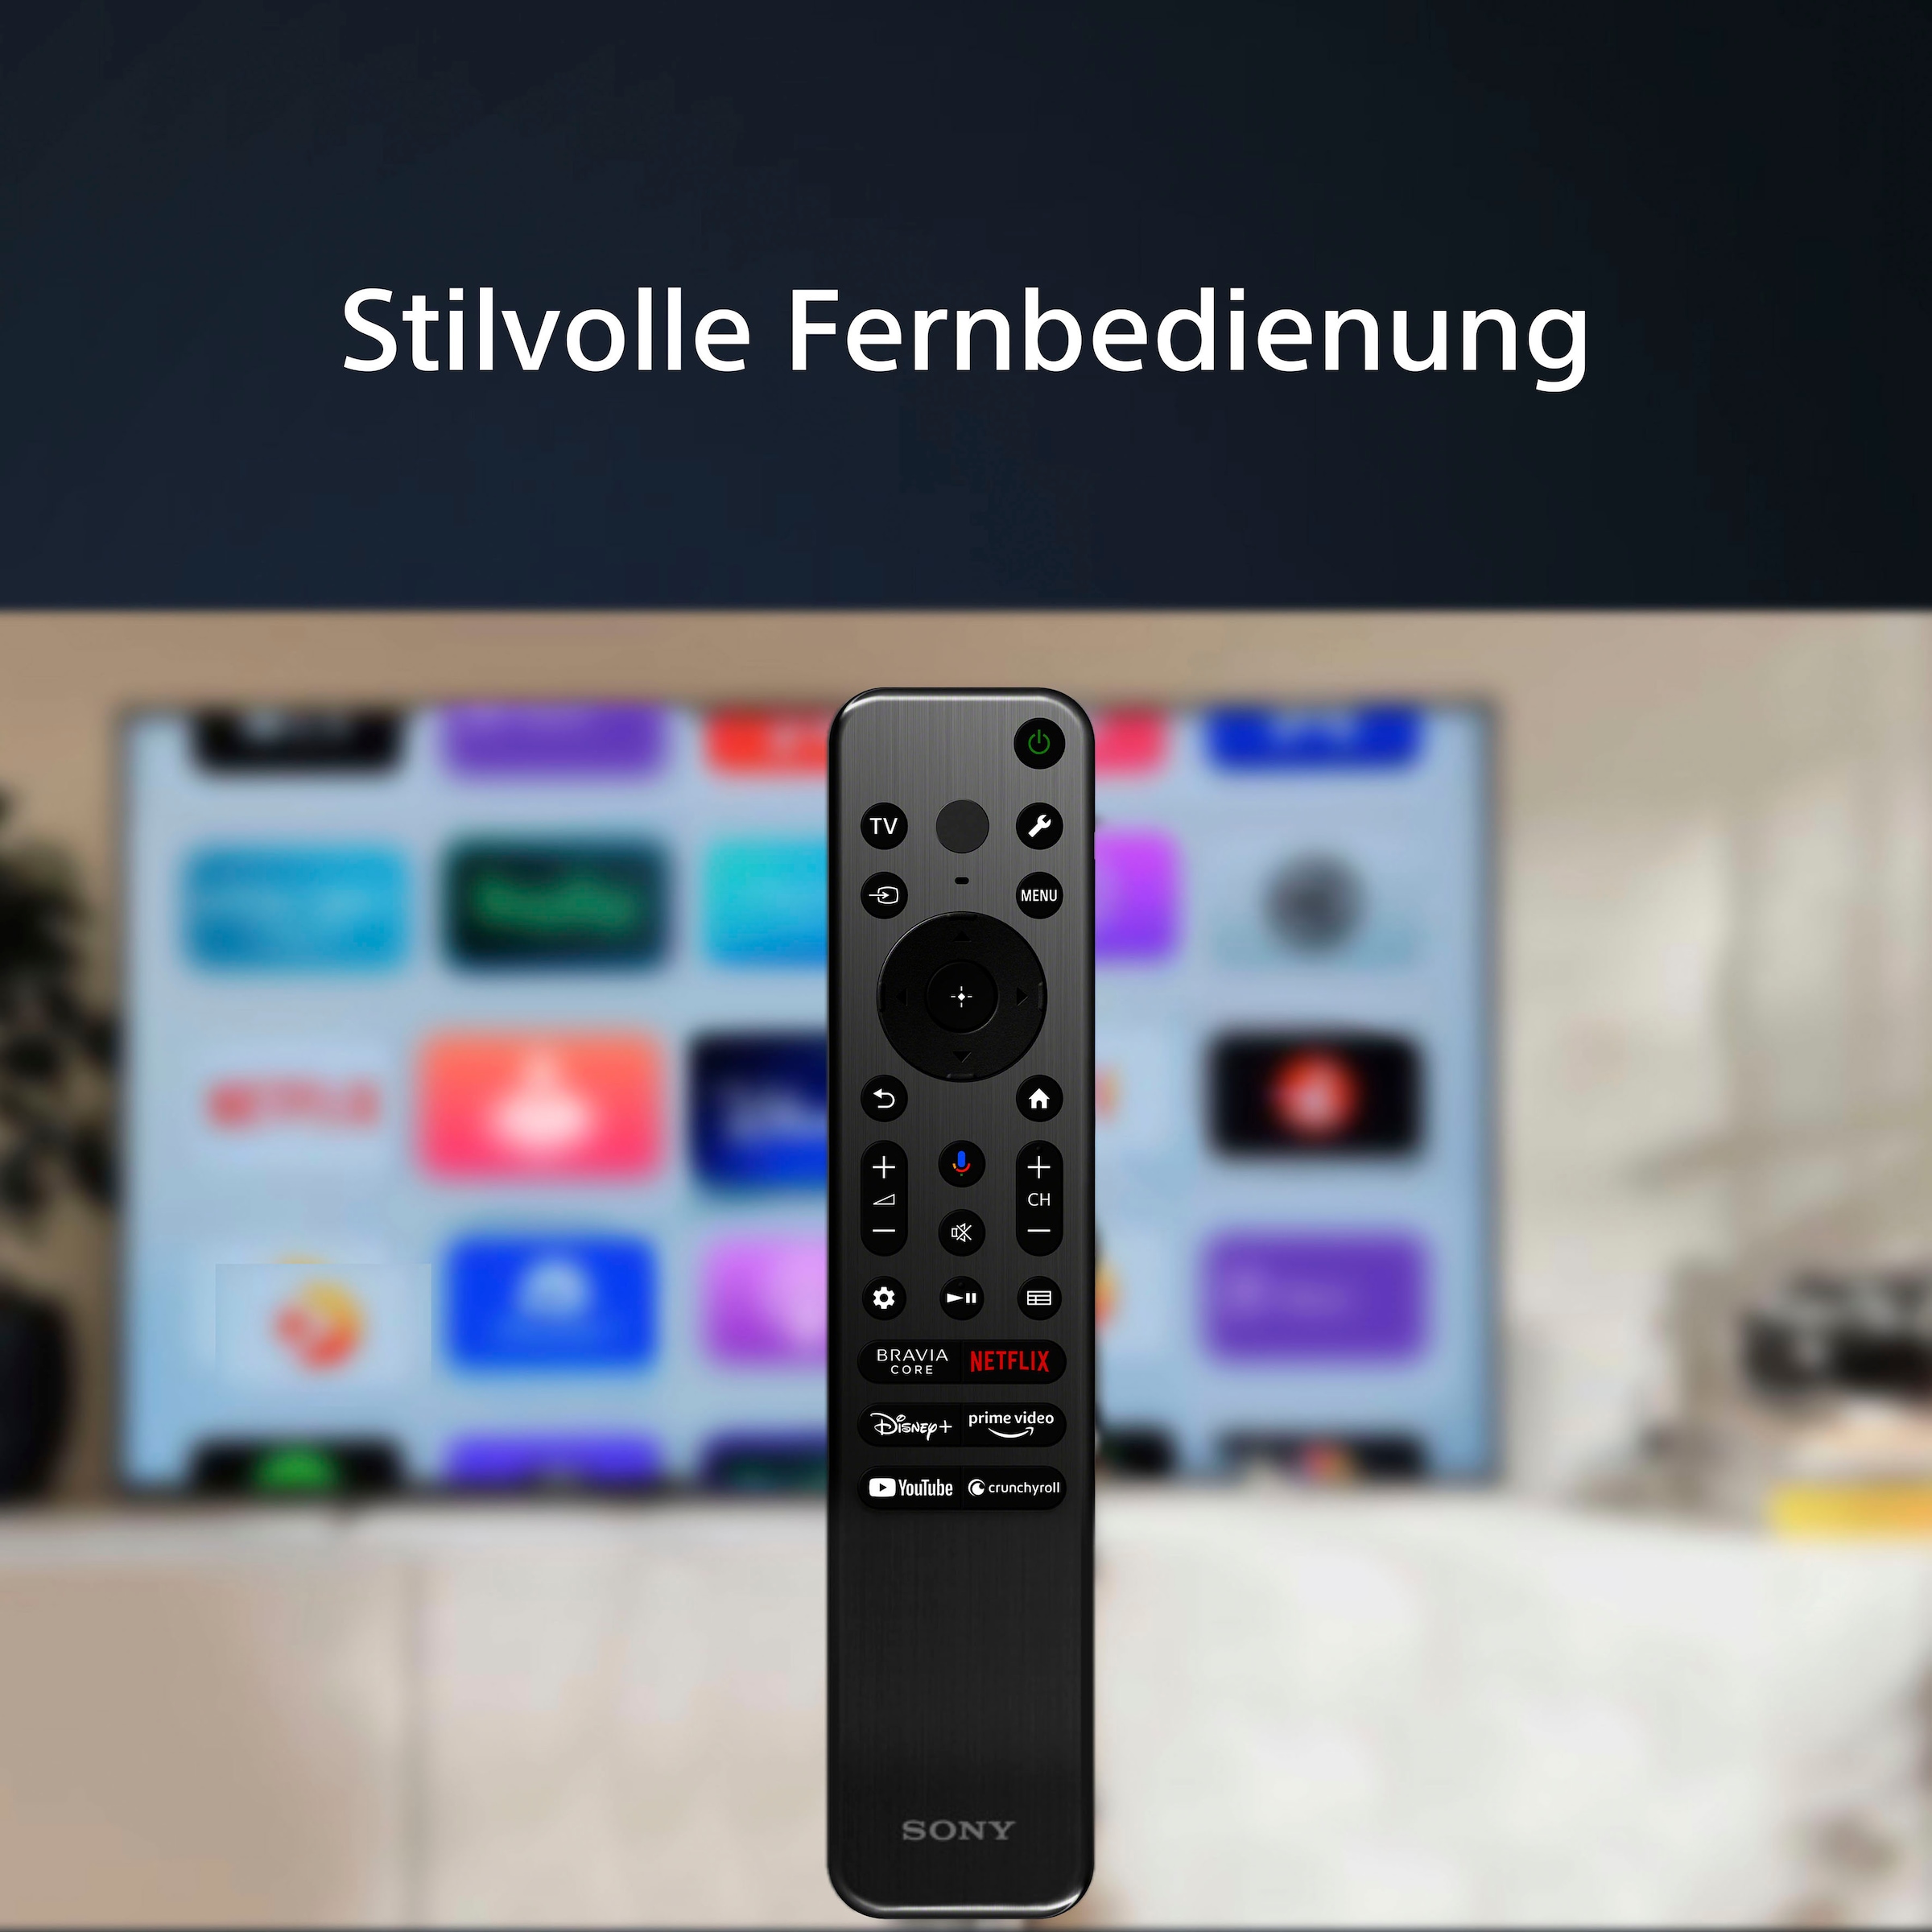 kaufen 164 Rechnung PS5-Features TV-Google exklusiven cm/65 PRO, Sony HD, BRAVIA CORE, 4K Ultra LED-Fernseher auf »XR-65X90L«, Zoll, TV-Smart-TV, mit TRILUMINOS Android